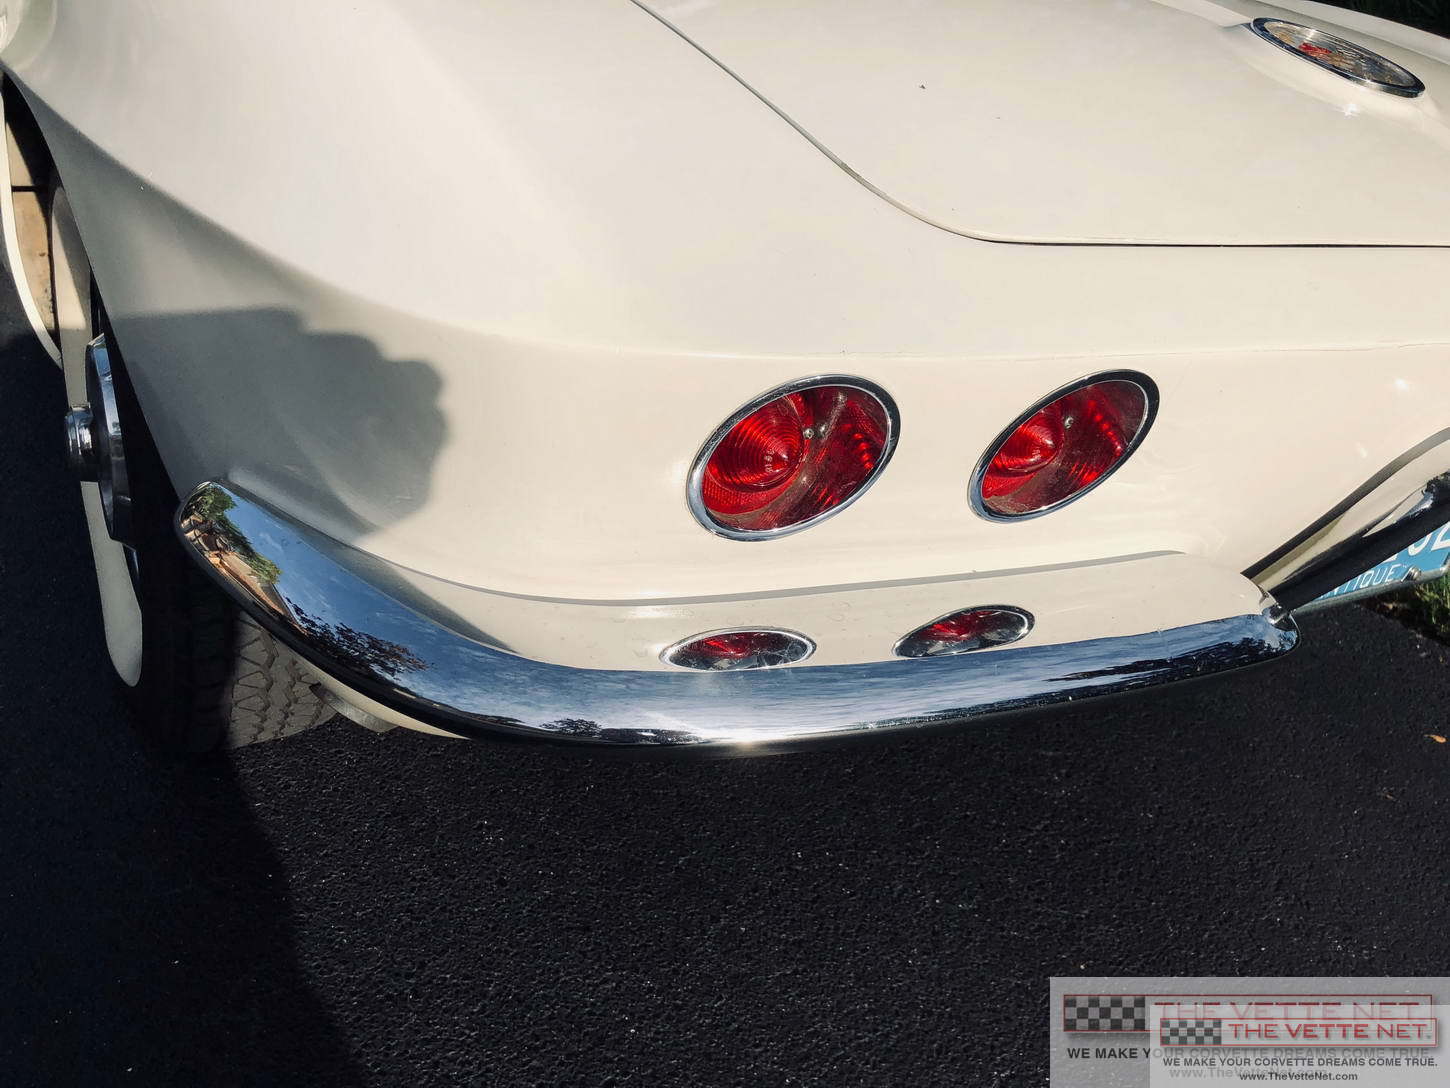 1961 Corvette Convertible White with Silver Coves